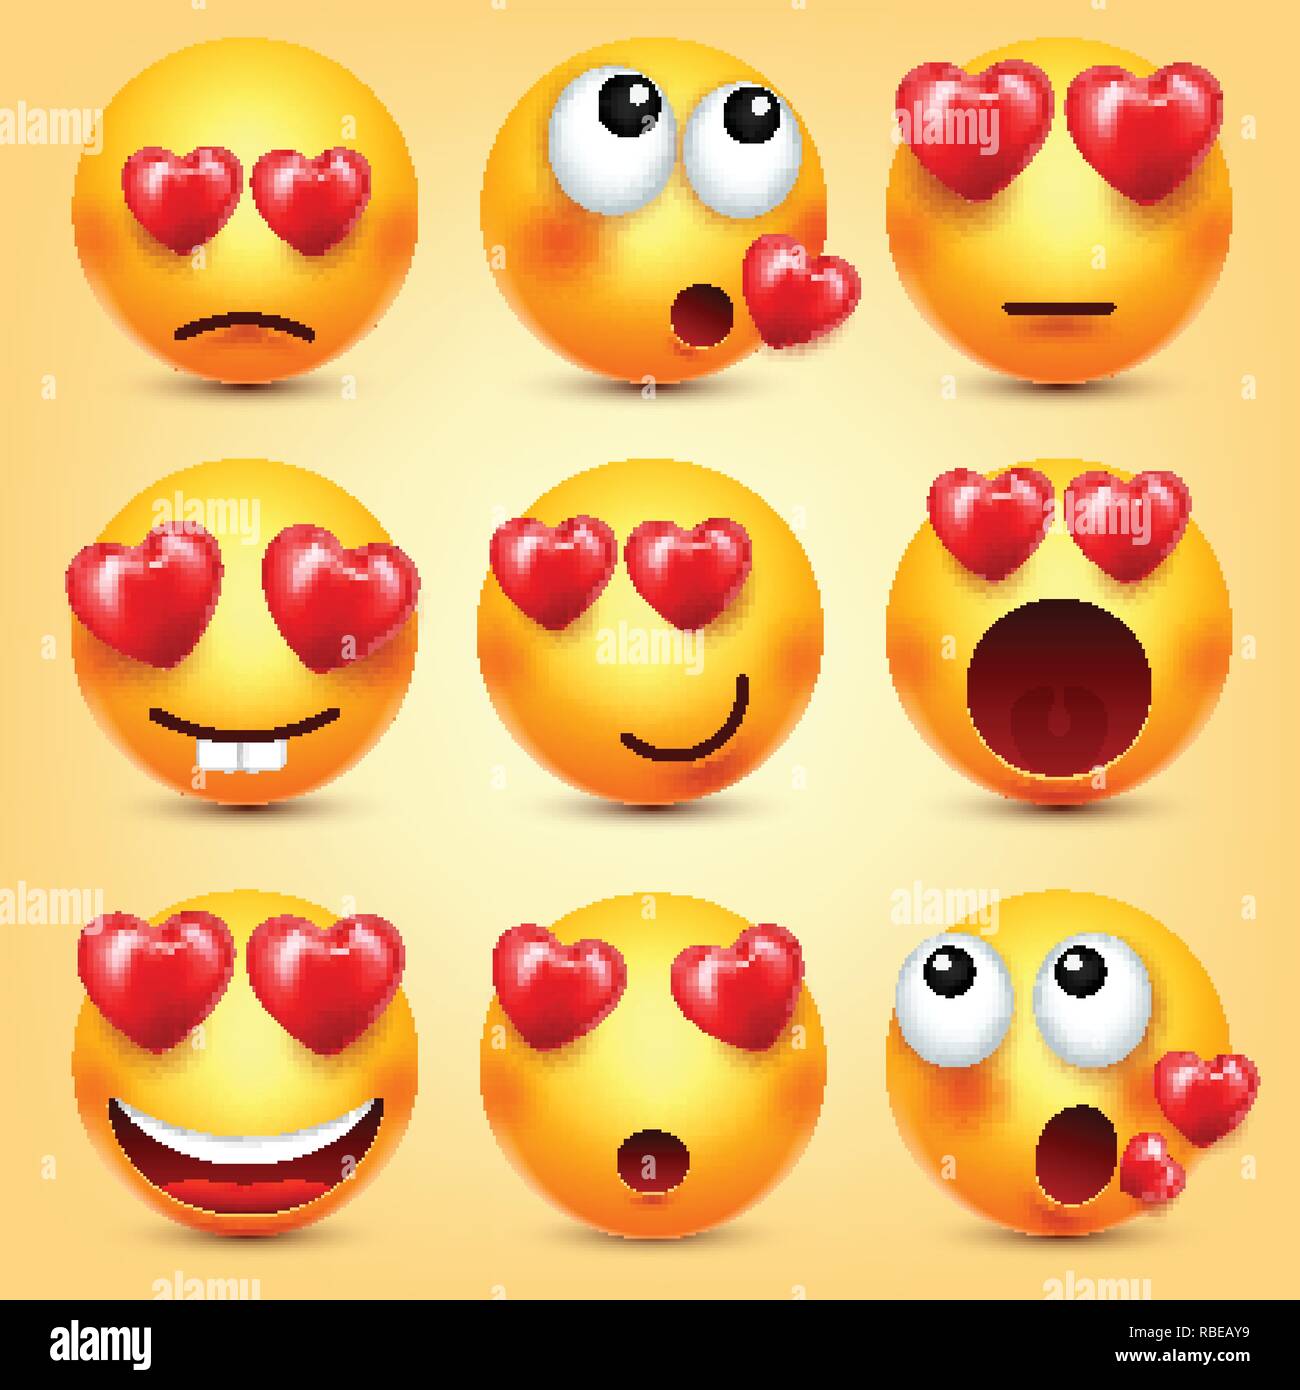 Emoji Smiley With Red Heart Vector Set Valentines Day Yellow Cartoon